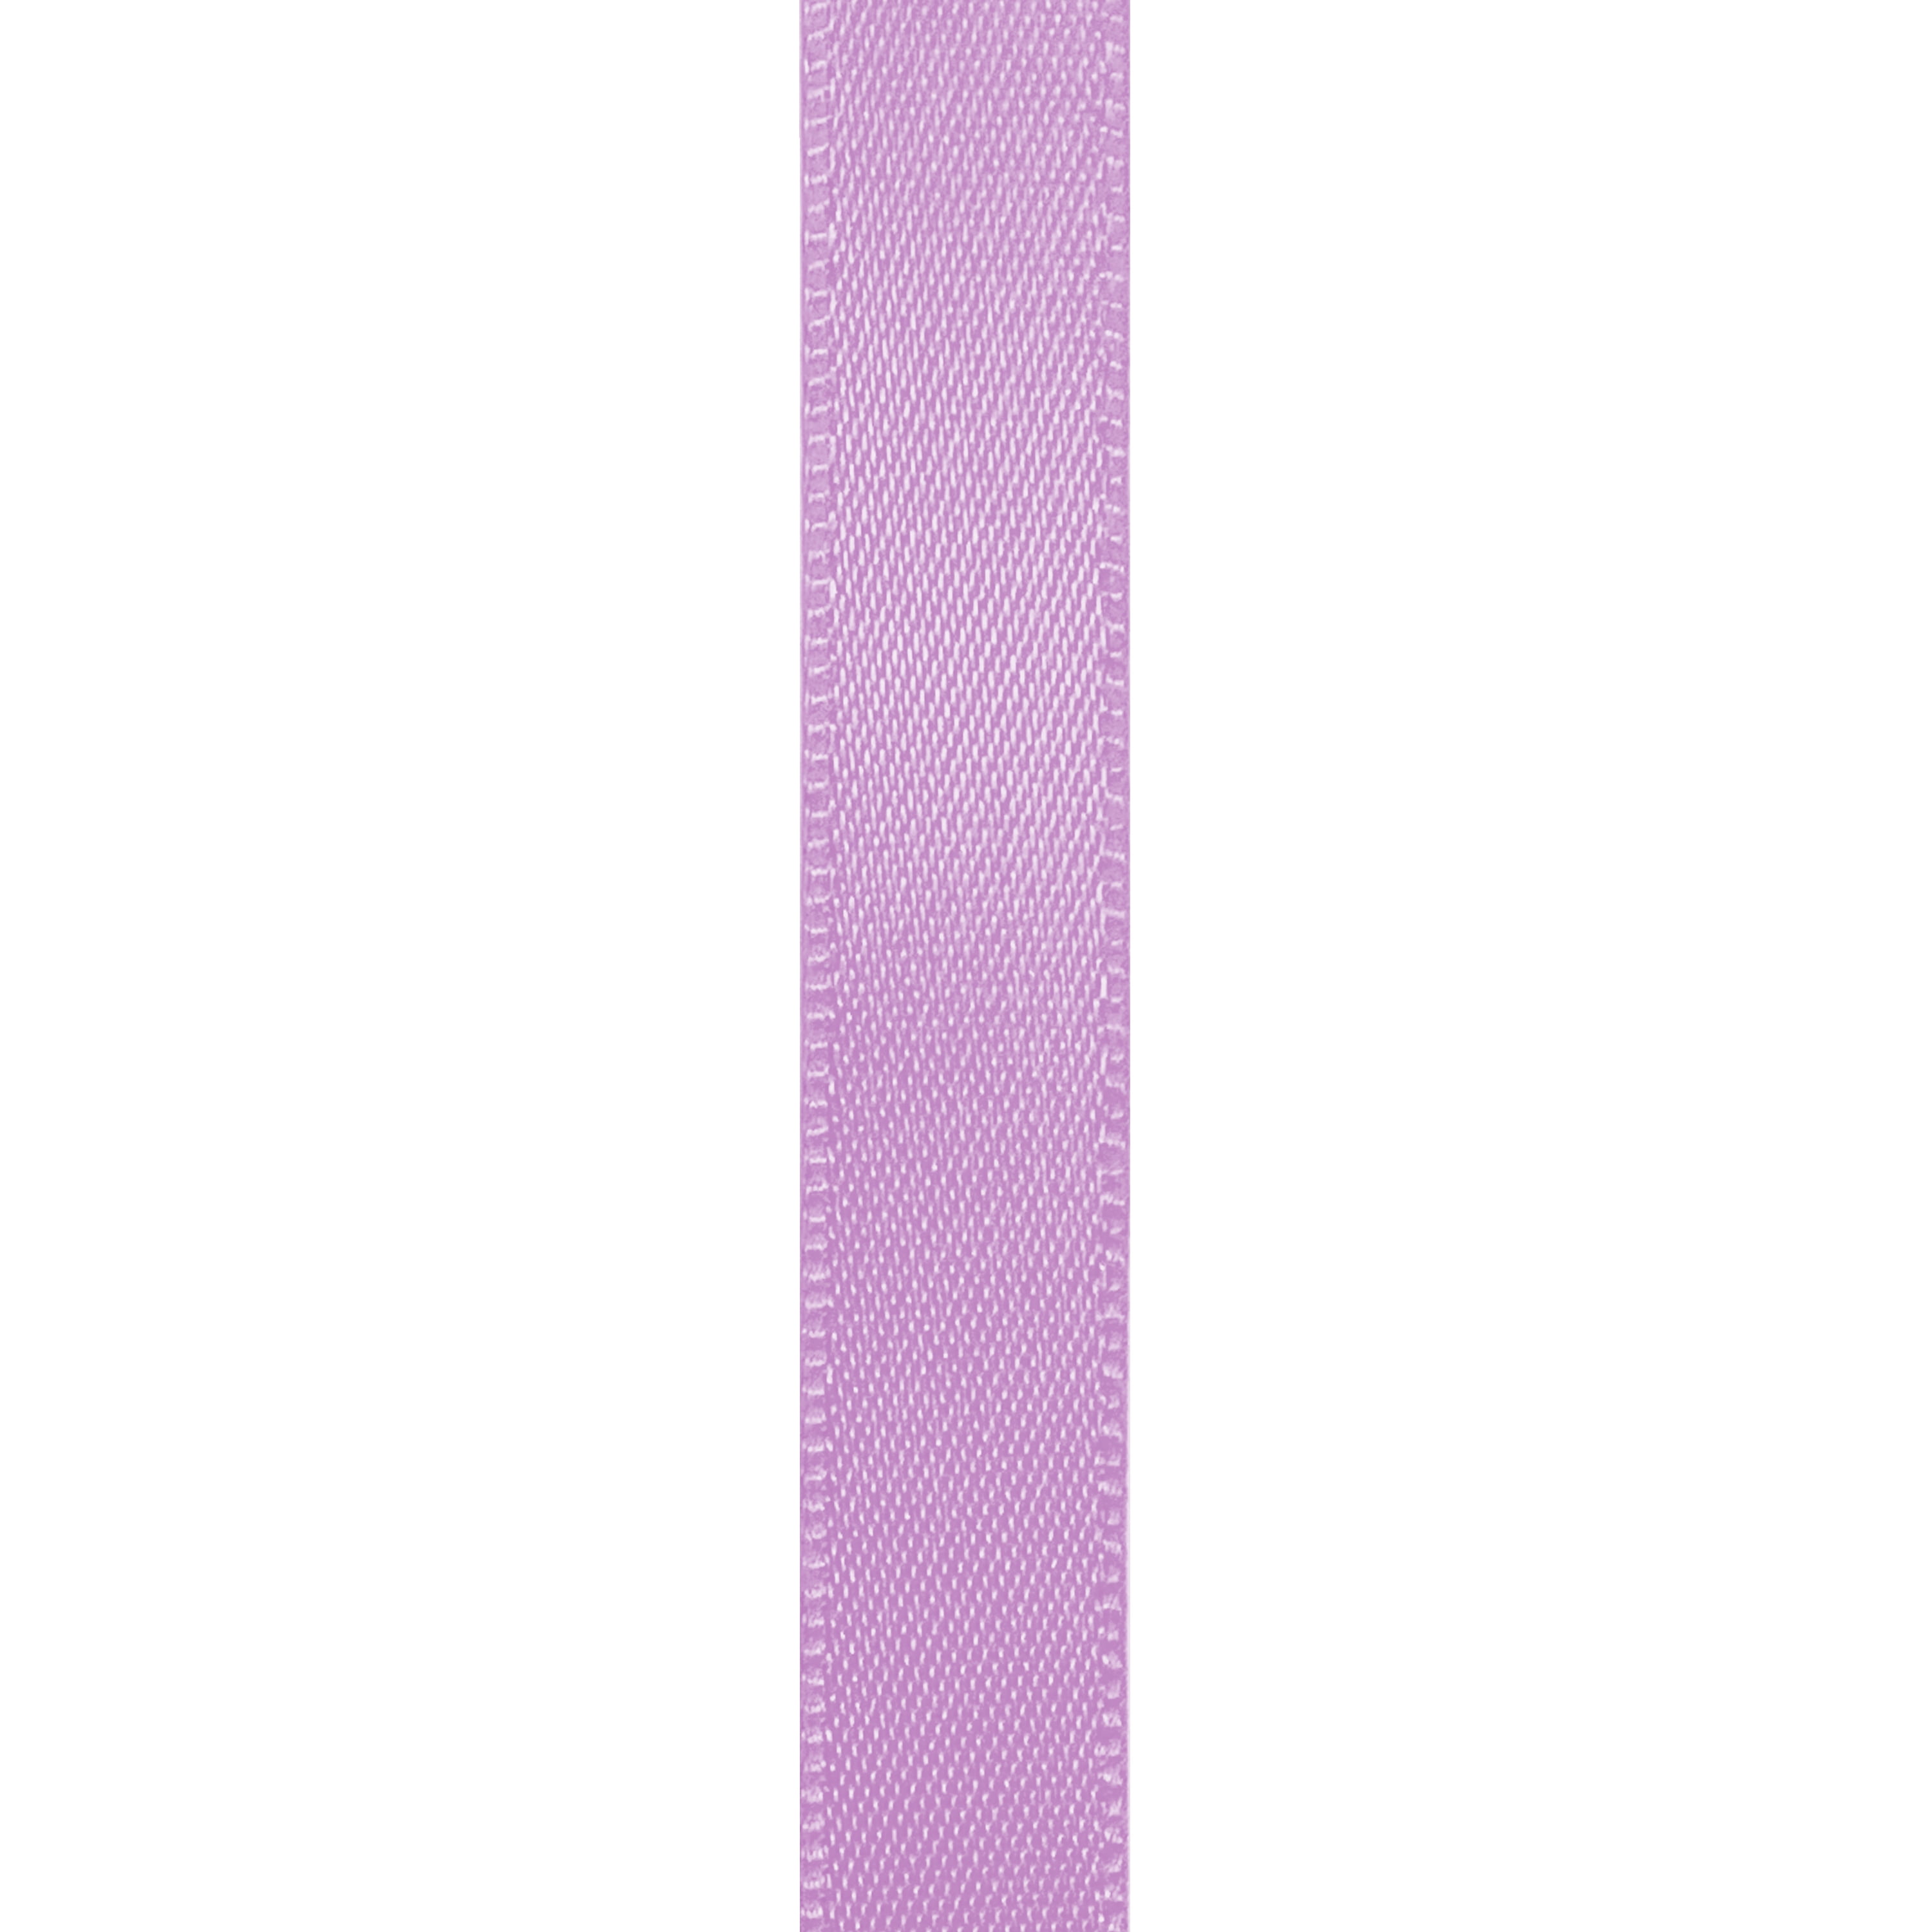 25mm x 20m Double Faced Lavender Lilac Satin Ribbon — Artificial